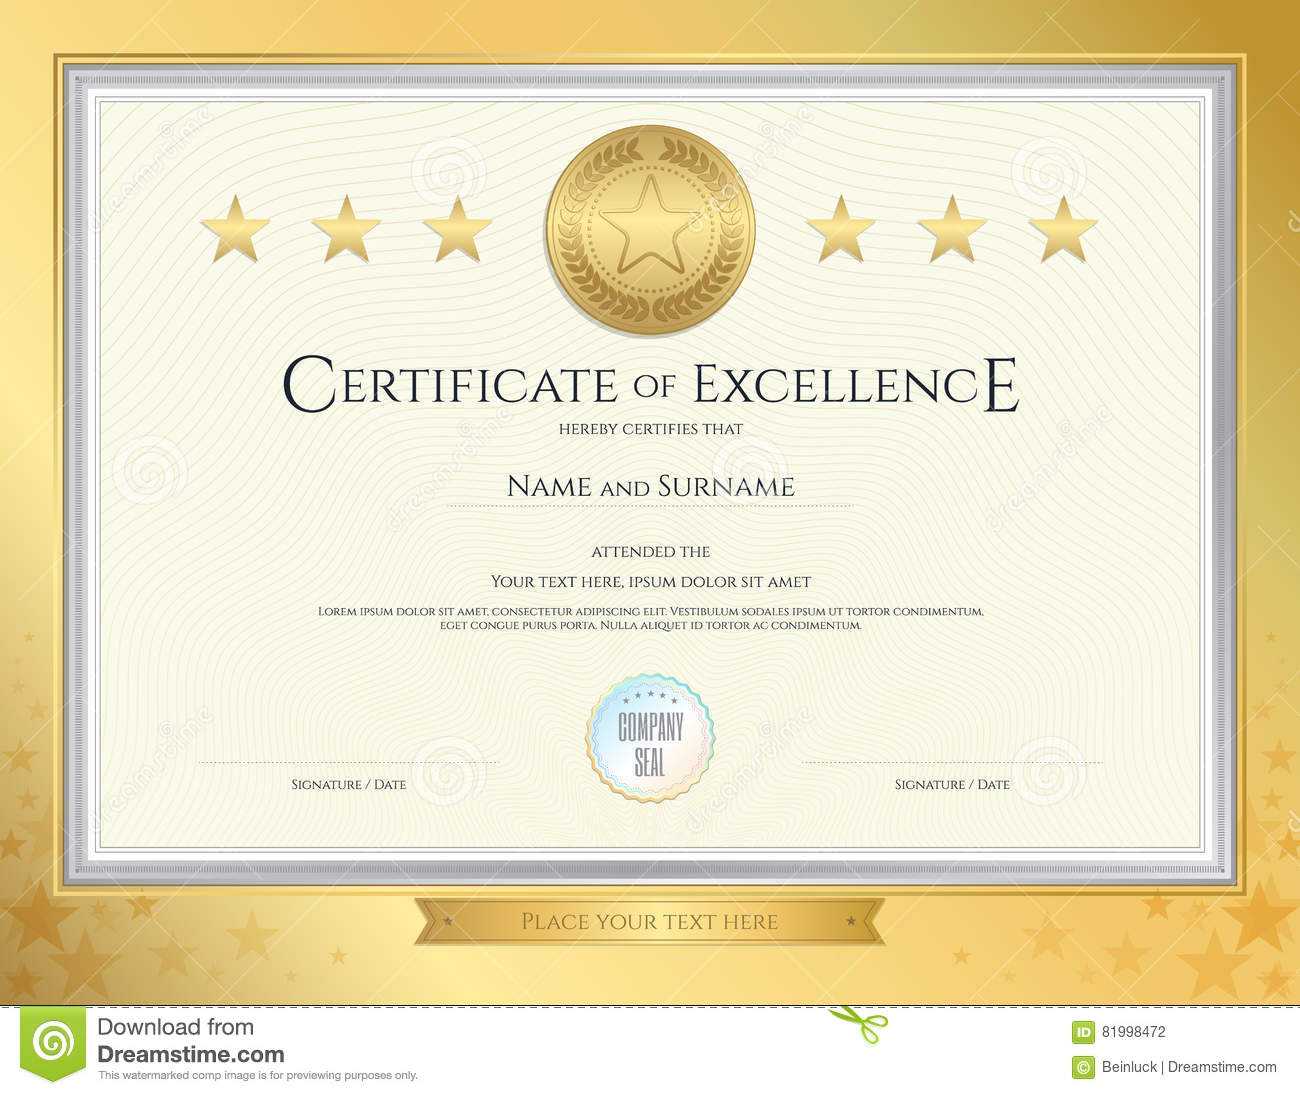 Elegant Certificate Template For Excellence, Achievement Inside Award Of Excellence Certificate Template